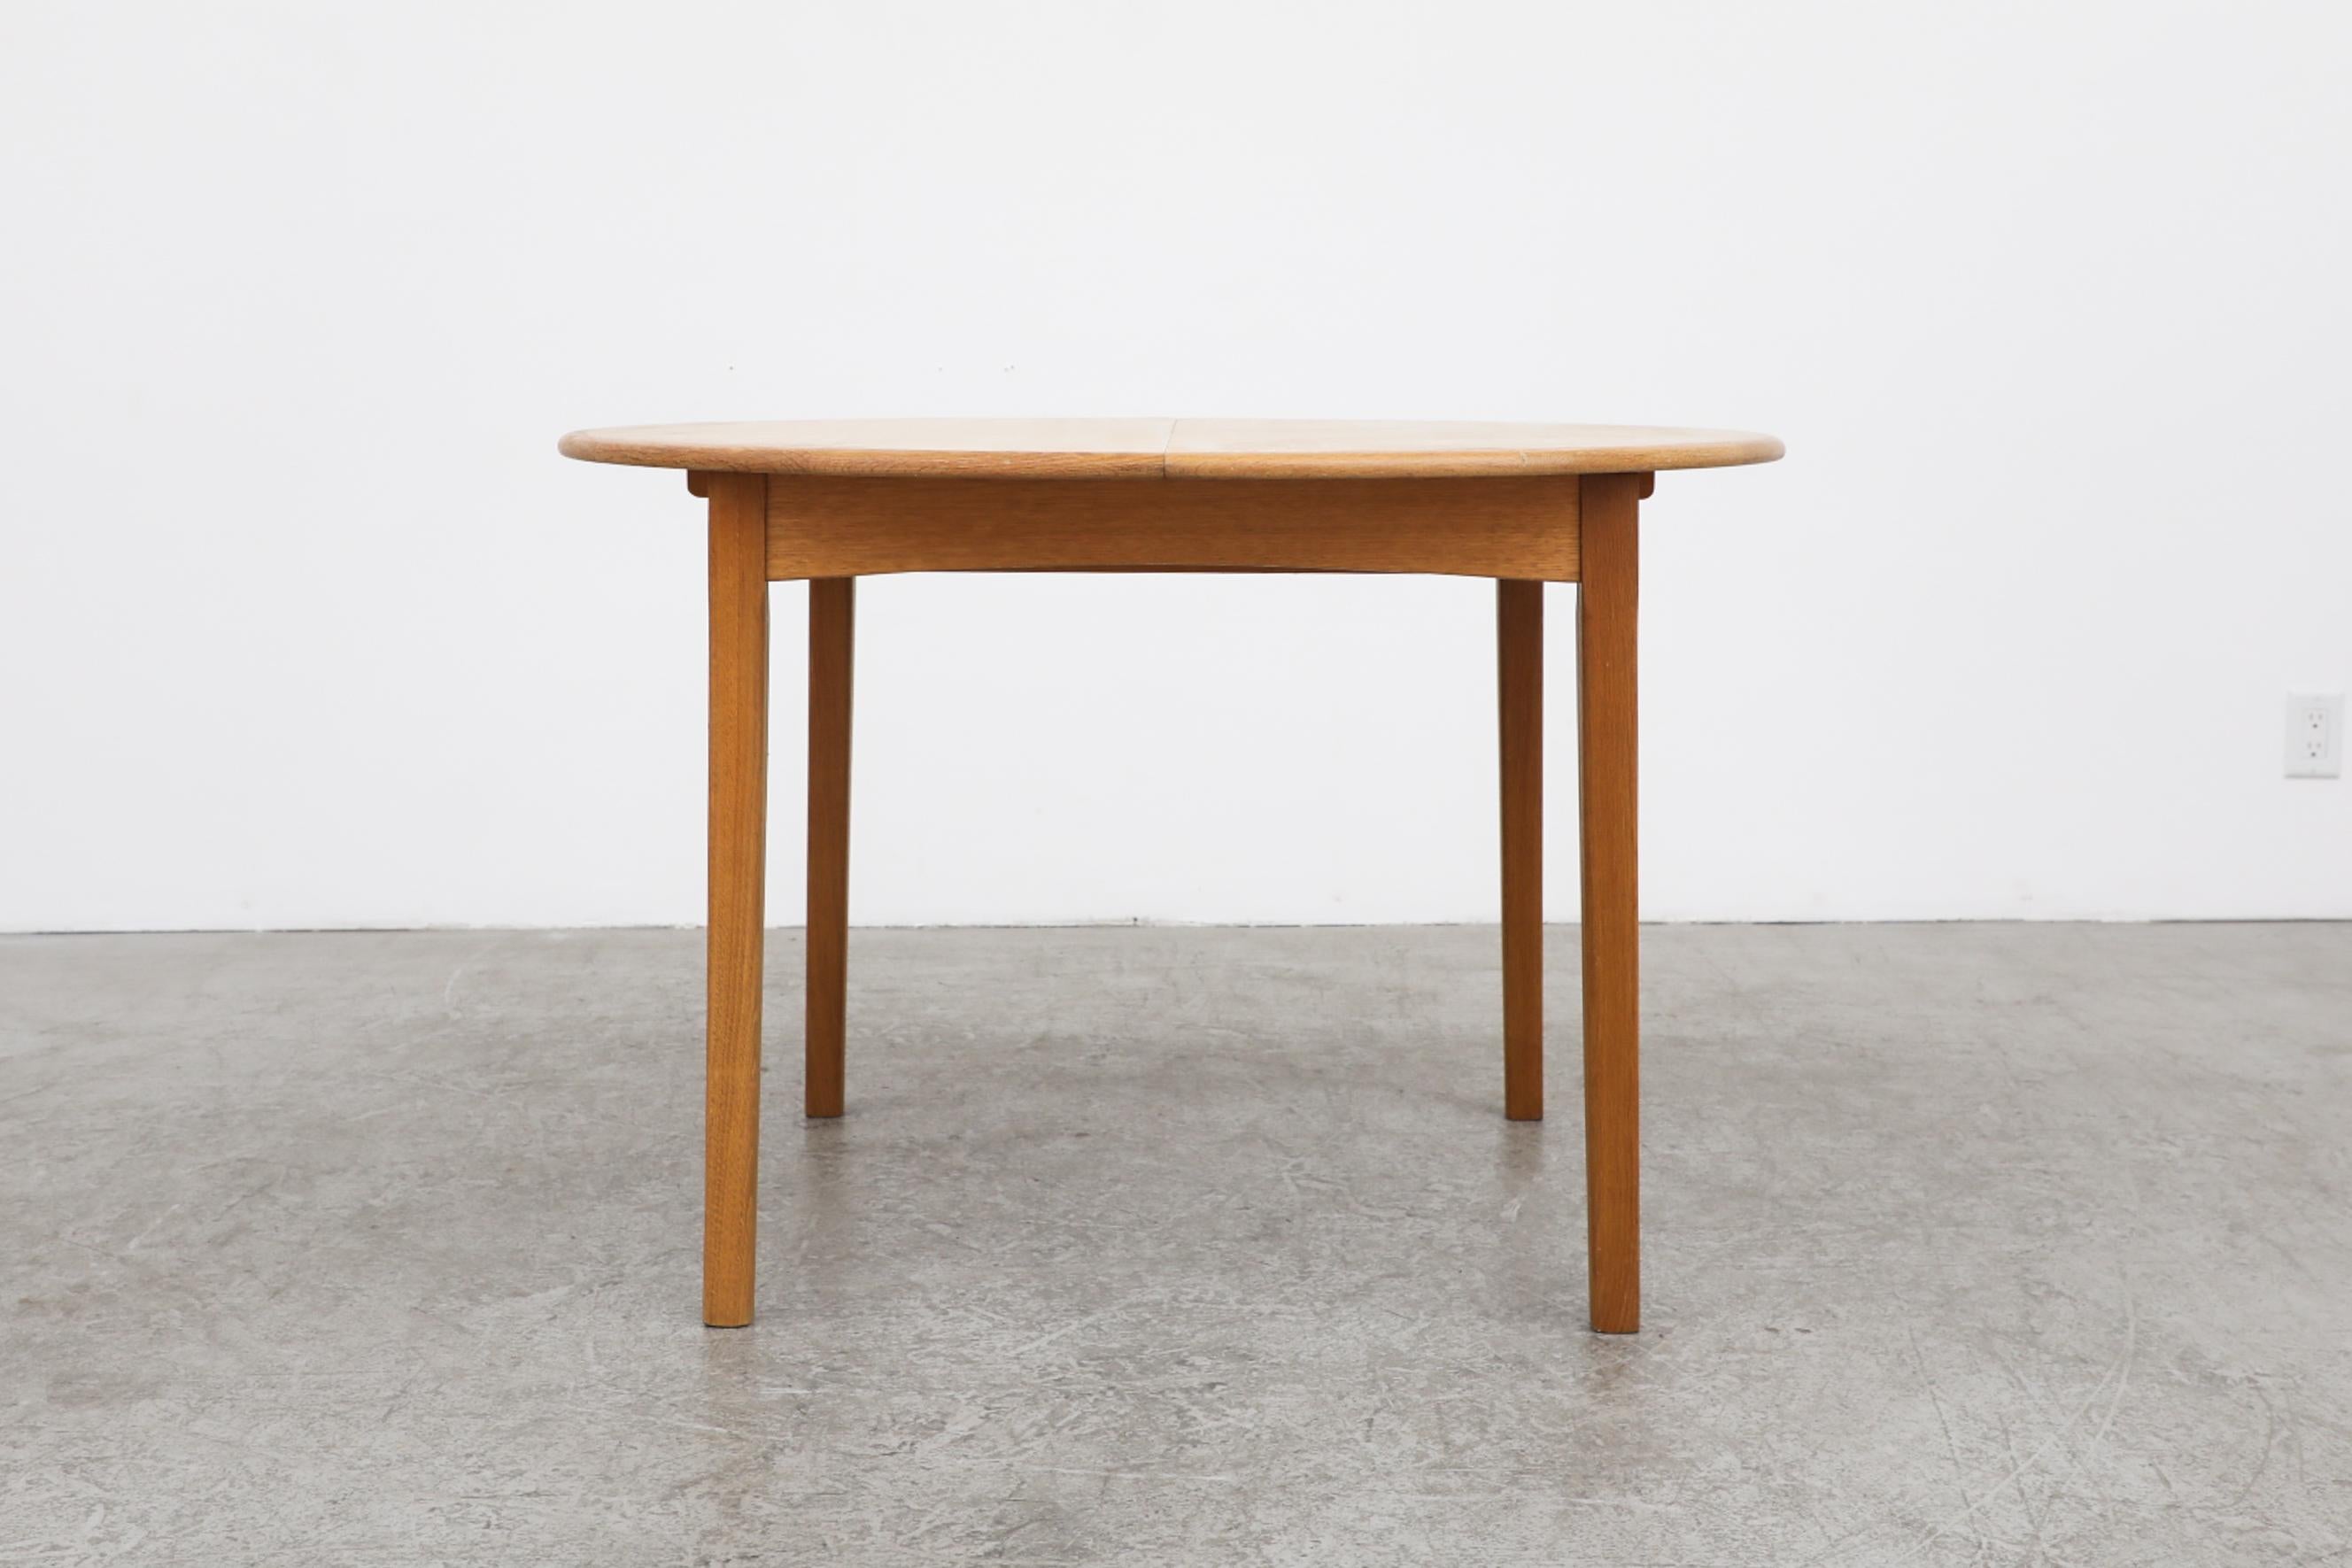 Mid-century dining table by Kurt Østervig. This small round oak table features a hidden extension leaf that sits underneath the table top and folds out in two sections. The leaf measures 13.87